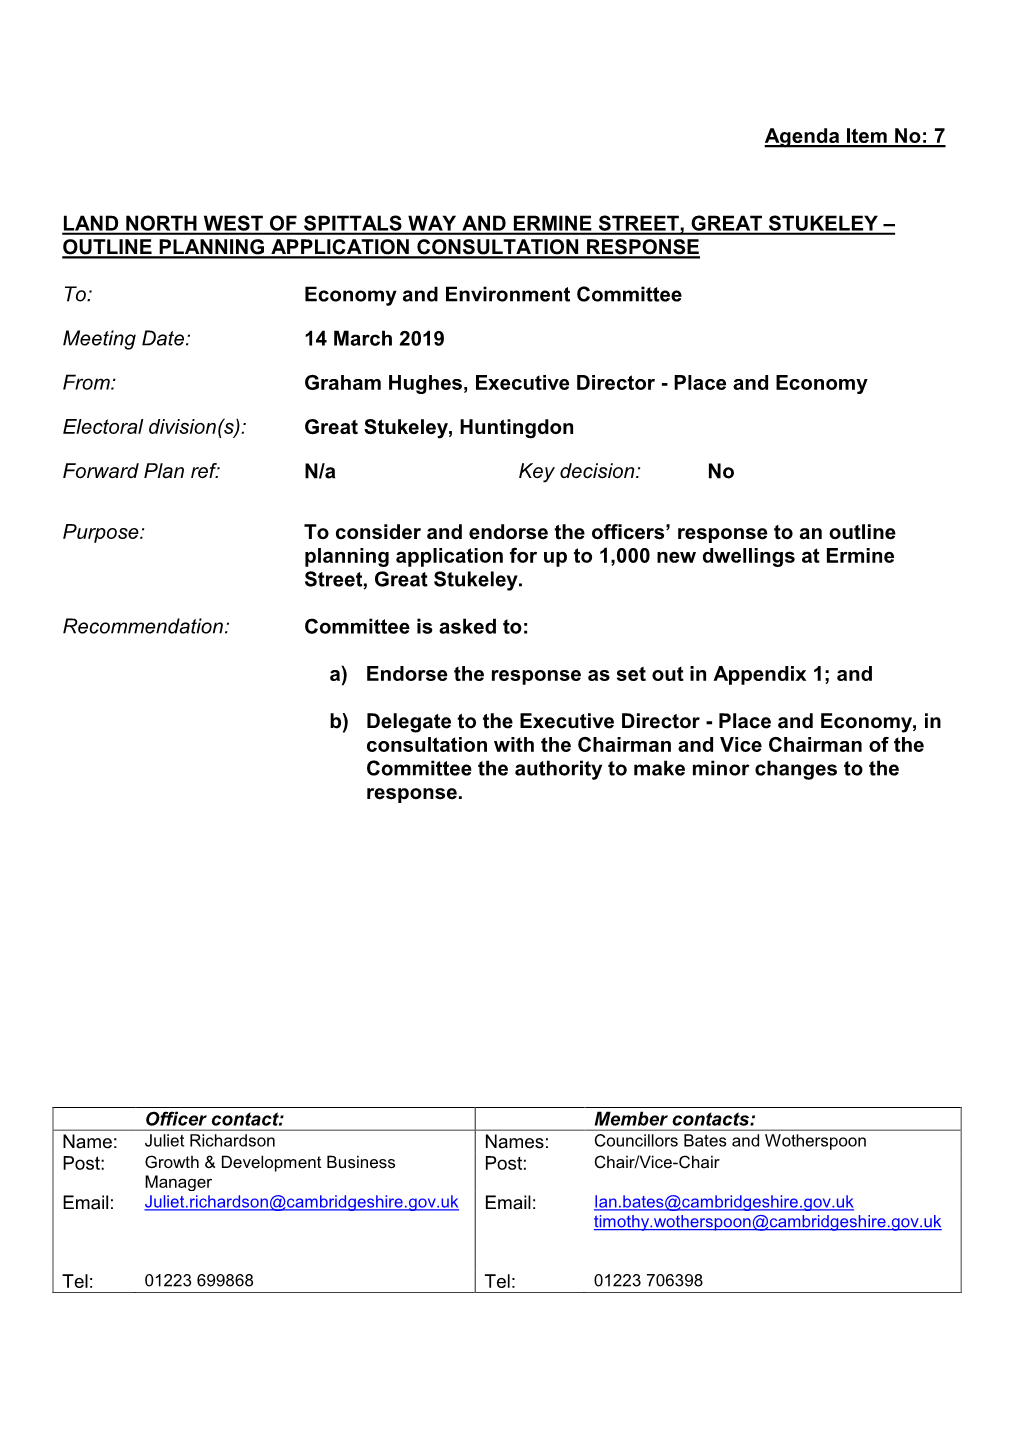 Agenda Item No: 7 LAND NORTH WEST of SPITTALS WAY and ERMINE STREET, GREAT STUKELEY – OUTLINE PLANNING APPLICATION CONSULTATI